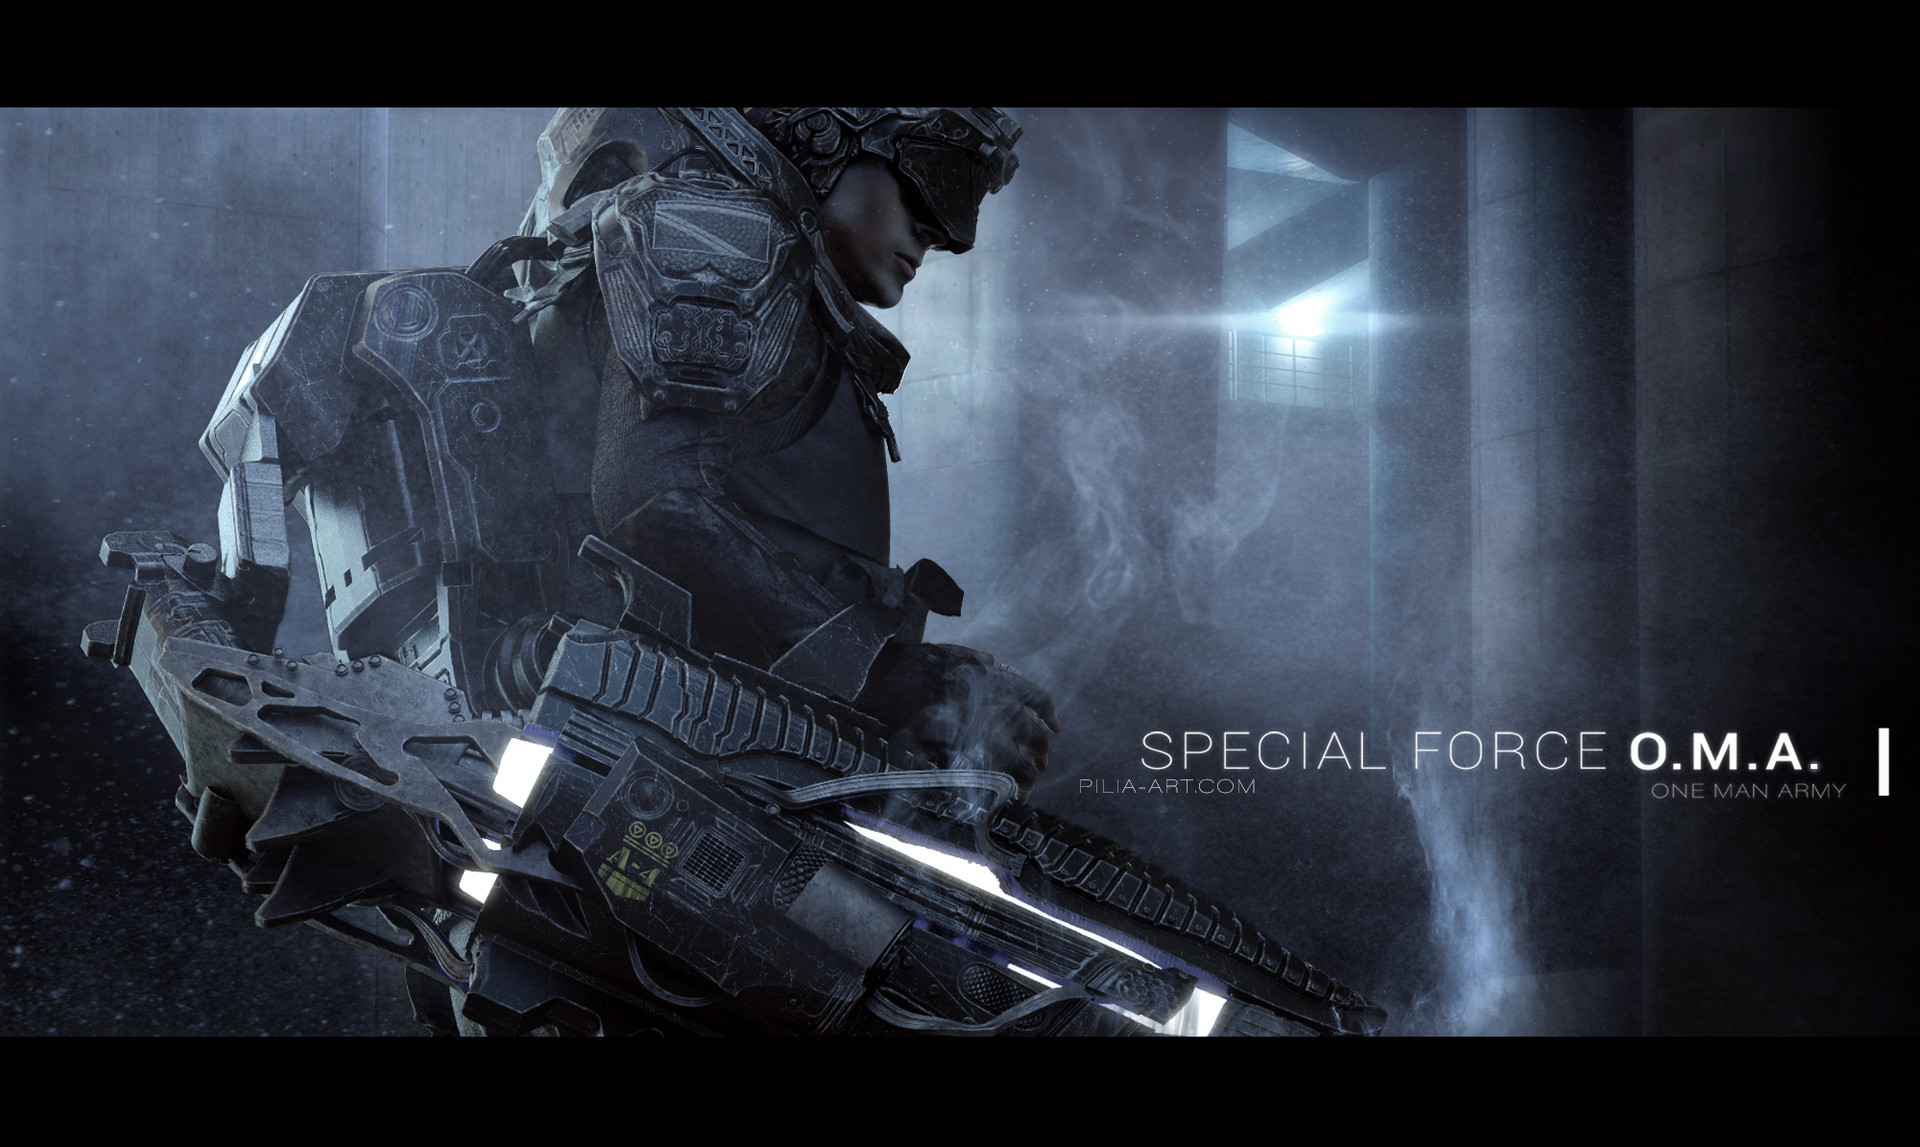 Special Force O.M.A. 03